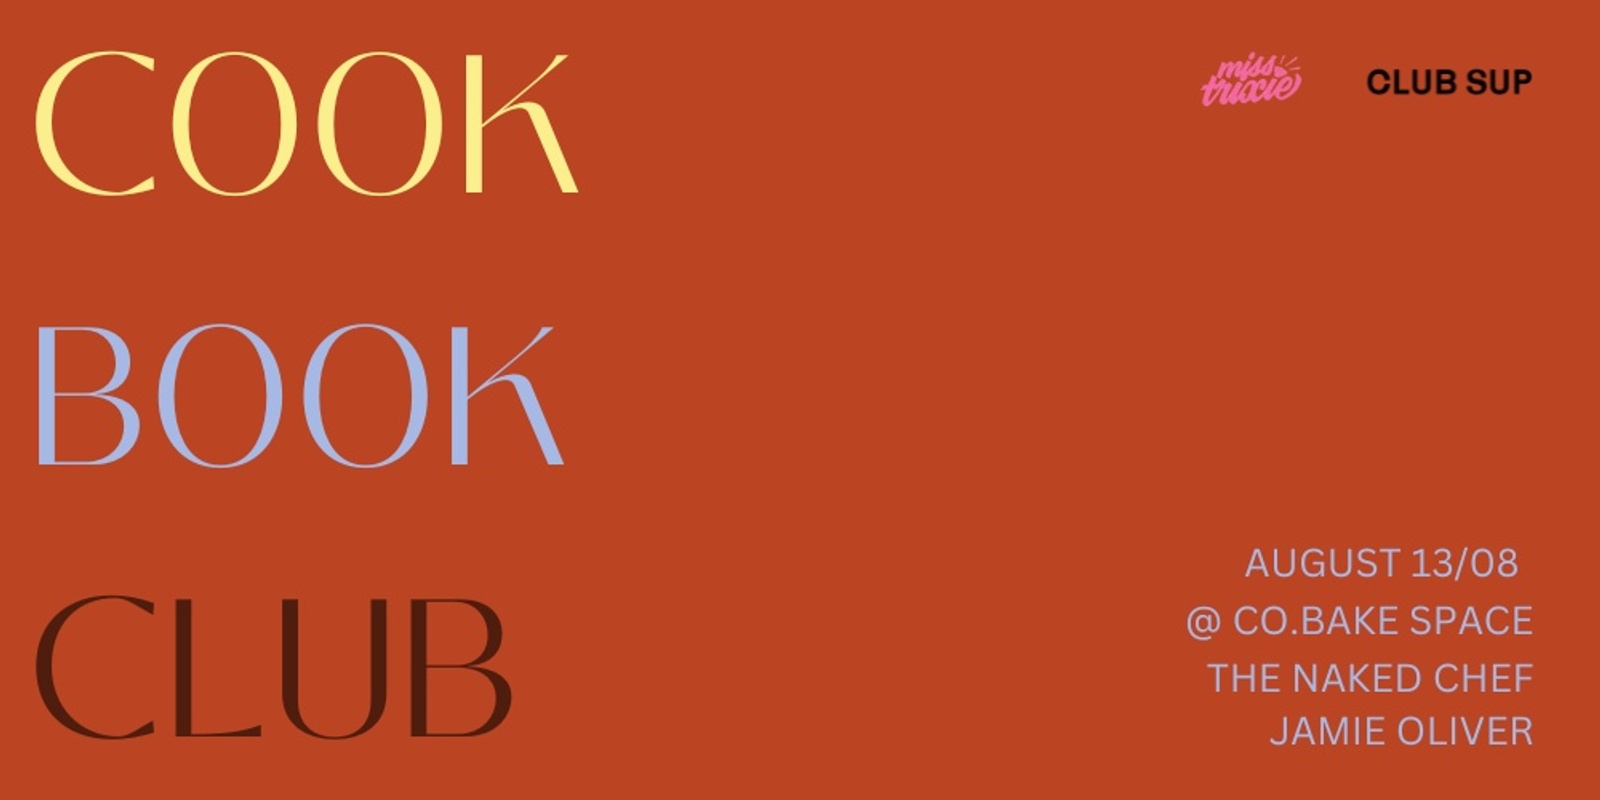 Banner image for COOK BOOK CLUB - JULY - NOTHING FANCY - ALISON ROMAN